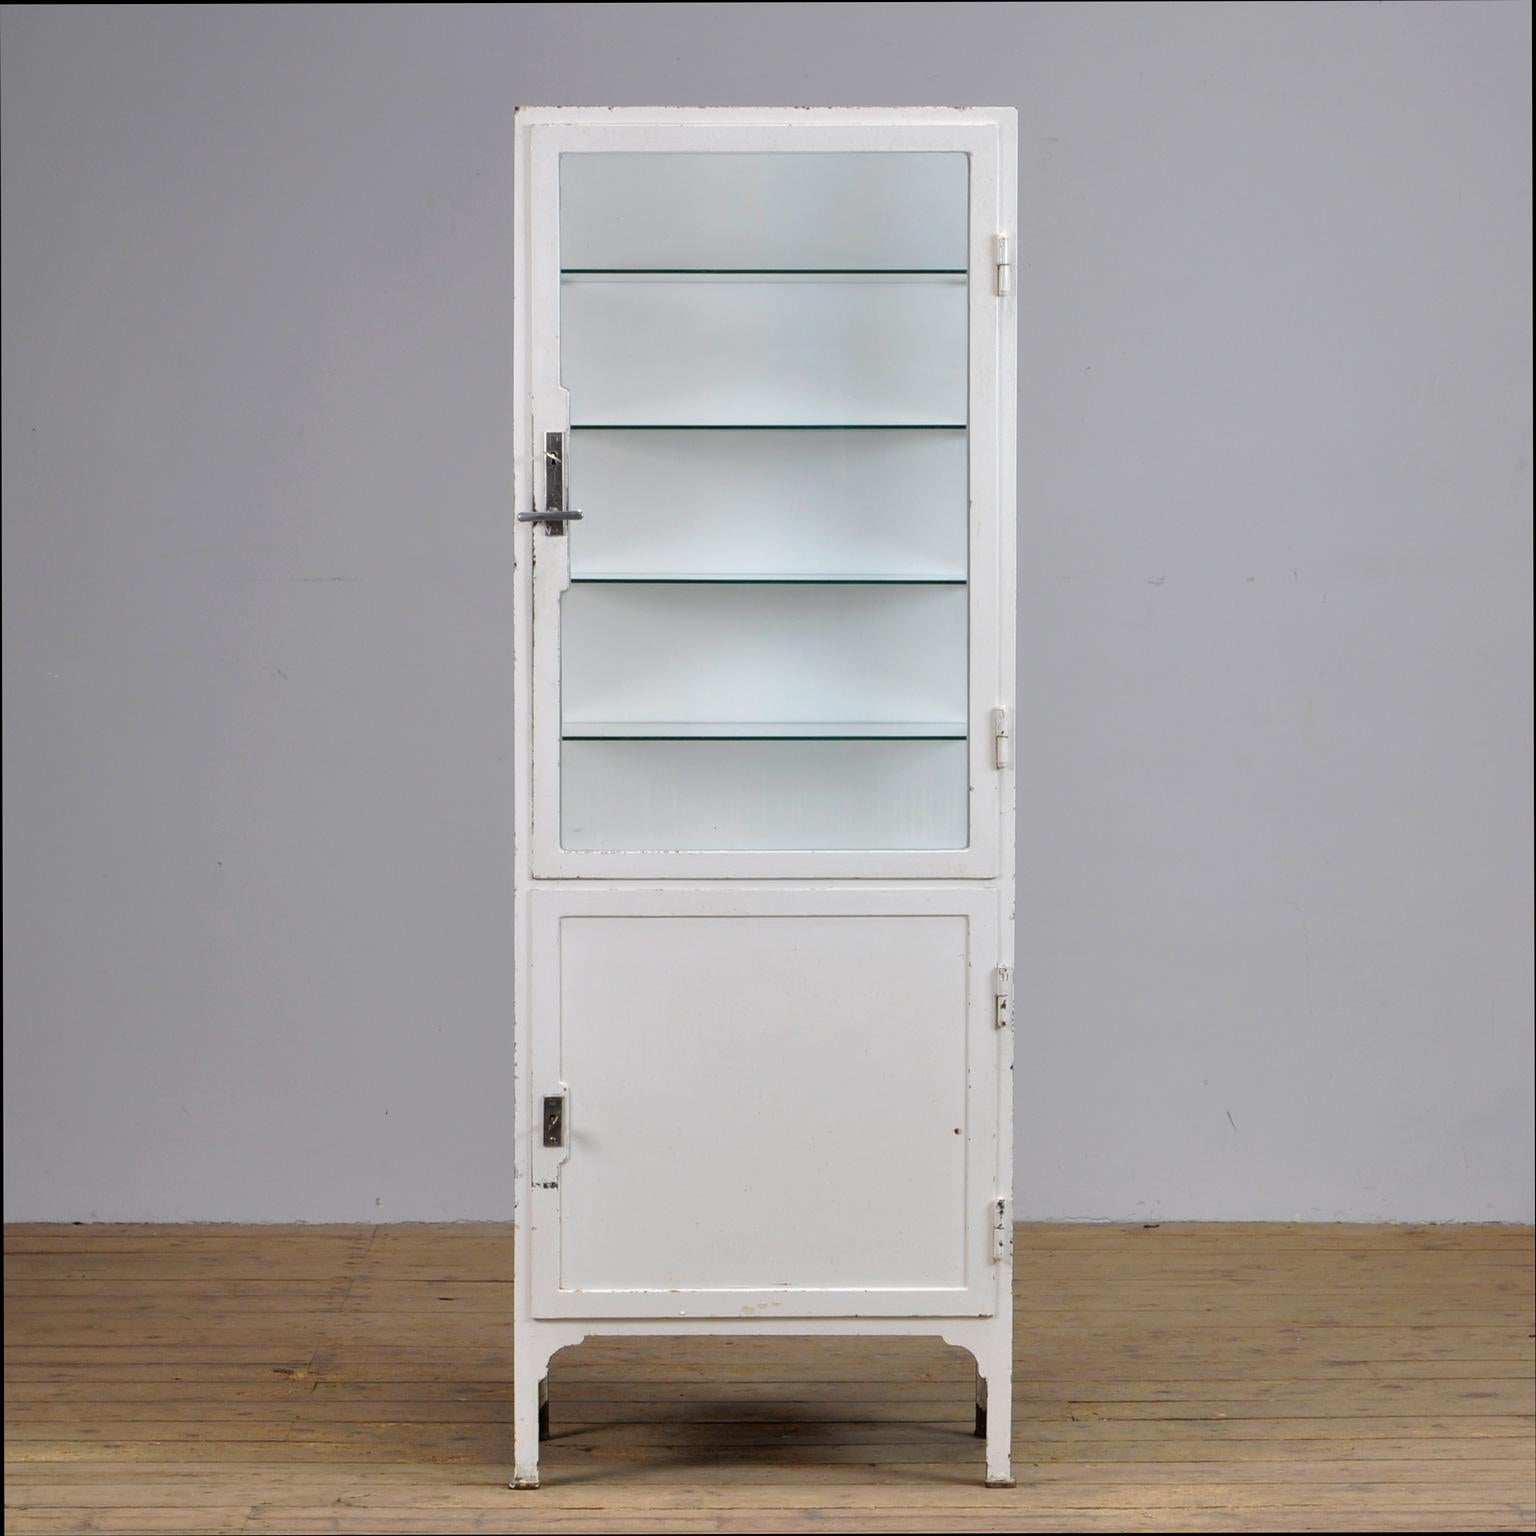 This former medicine cabinet was produced in the 1940s in Hungary and is made from thick iron and glass. With a very nice lock and handle on the top door. It features four new glass shelves.
   